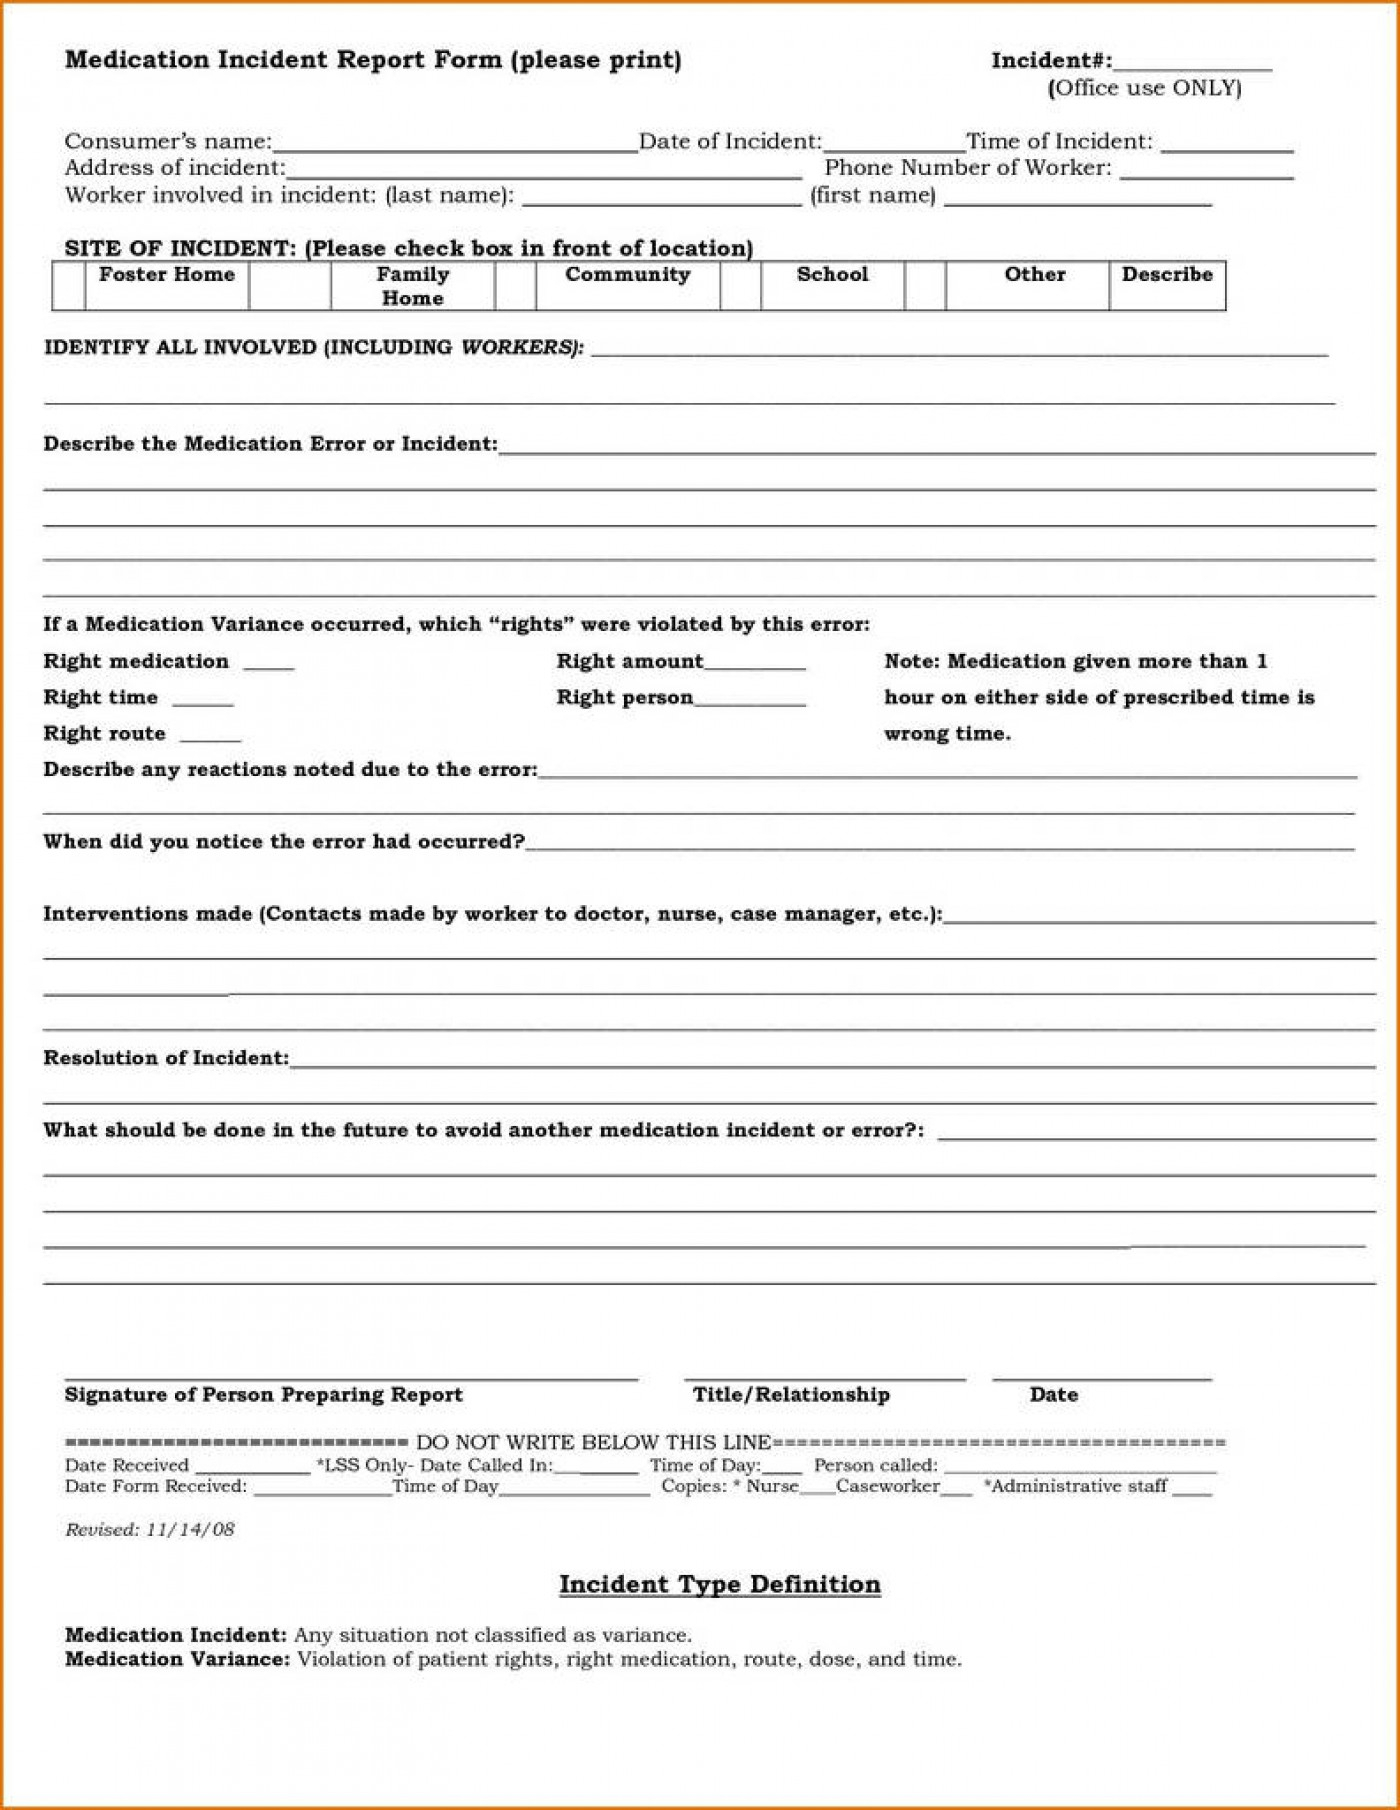 036 Medication Release Form Template Medical Forms Ideas With Medication Incident Report Form Template